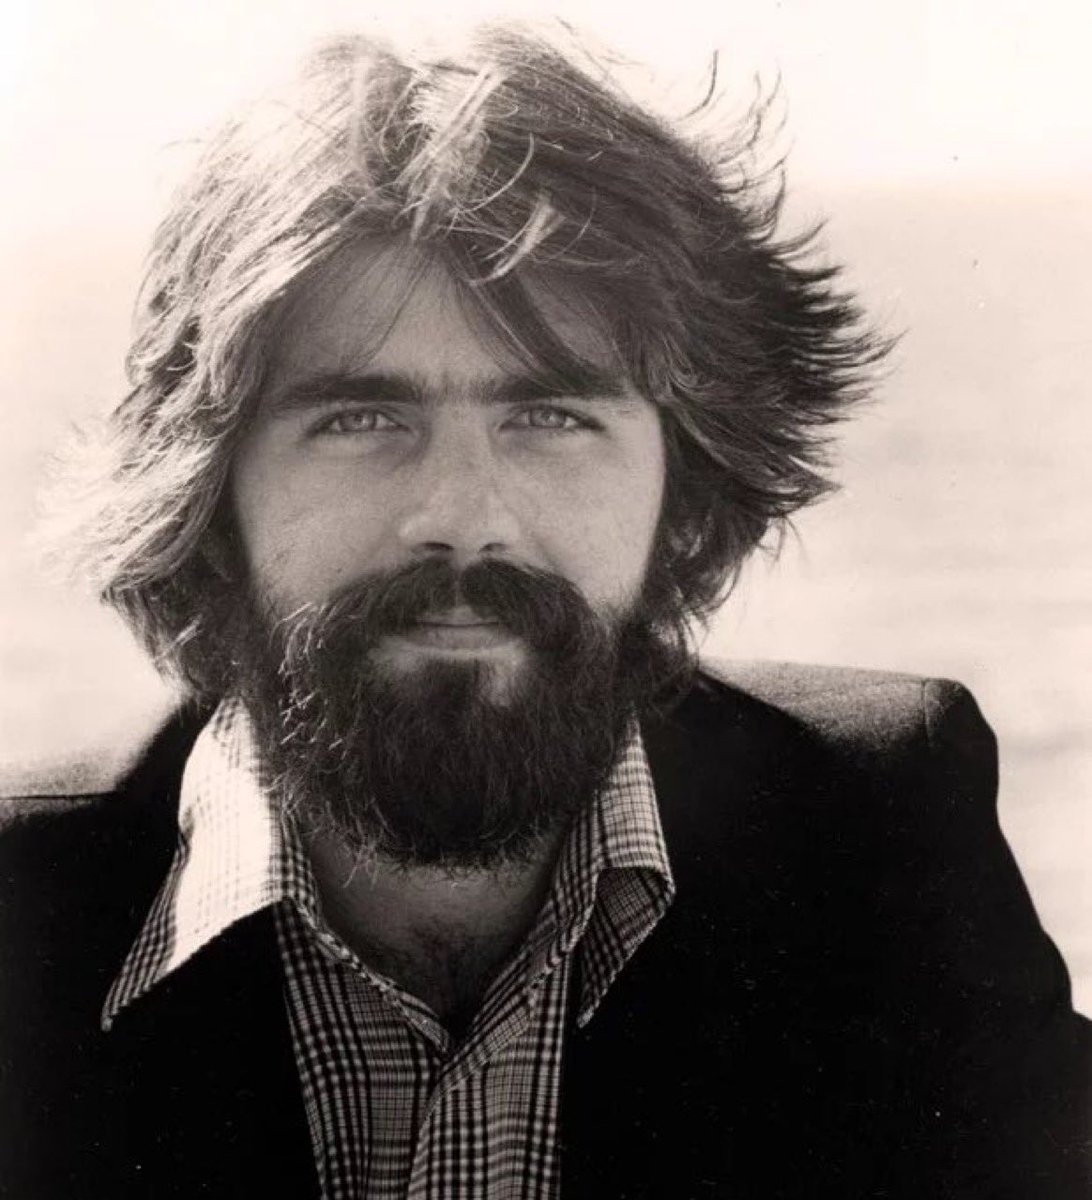 Michael McDonald is the GOAT backup vocalist and that’s a hill I’ll fucking die on. Motherfucker would come off the bench and put up triple-doubles.